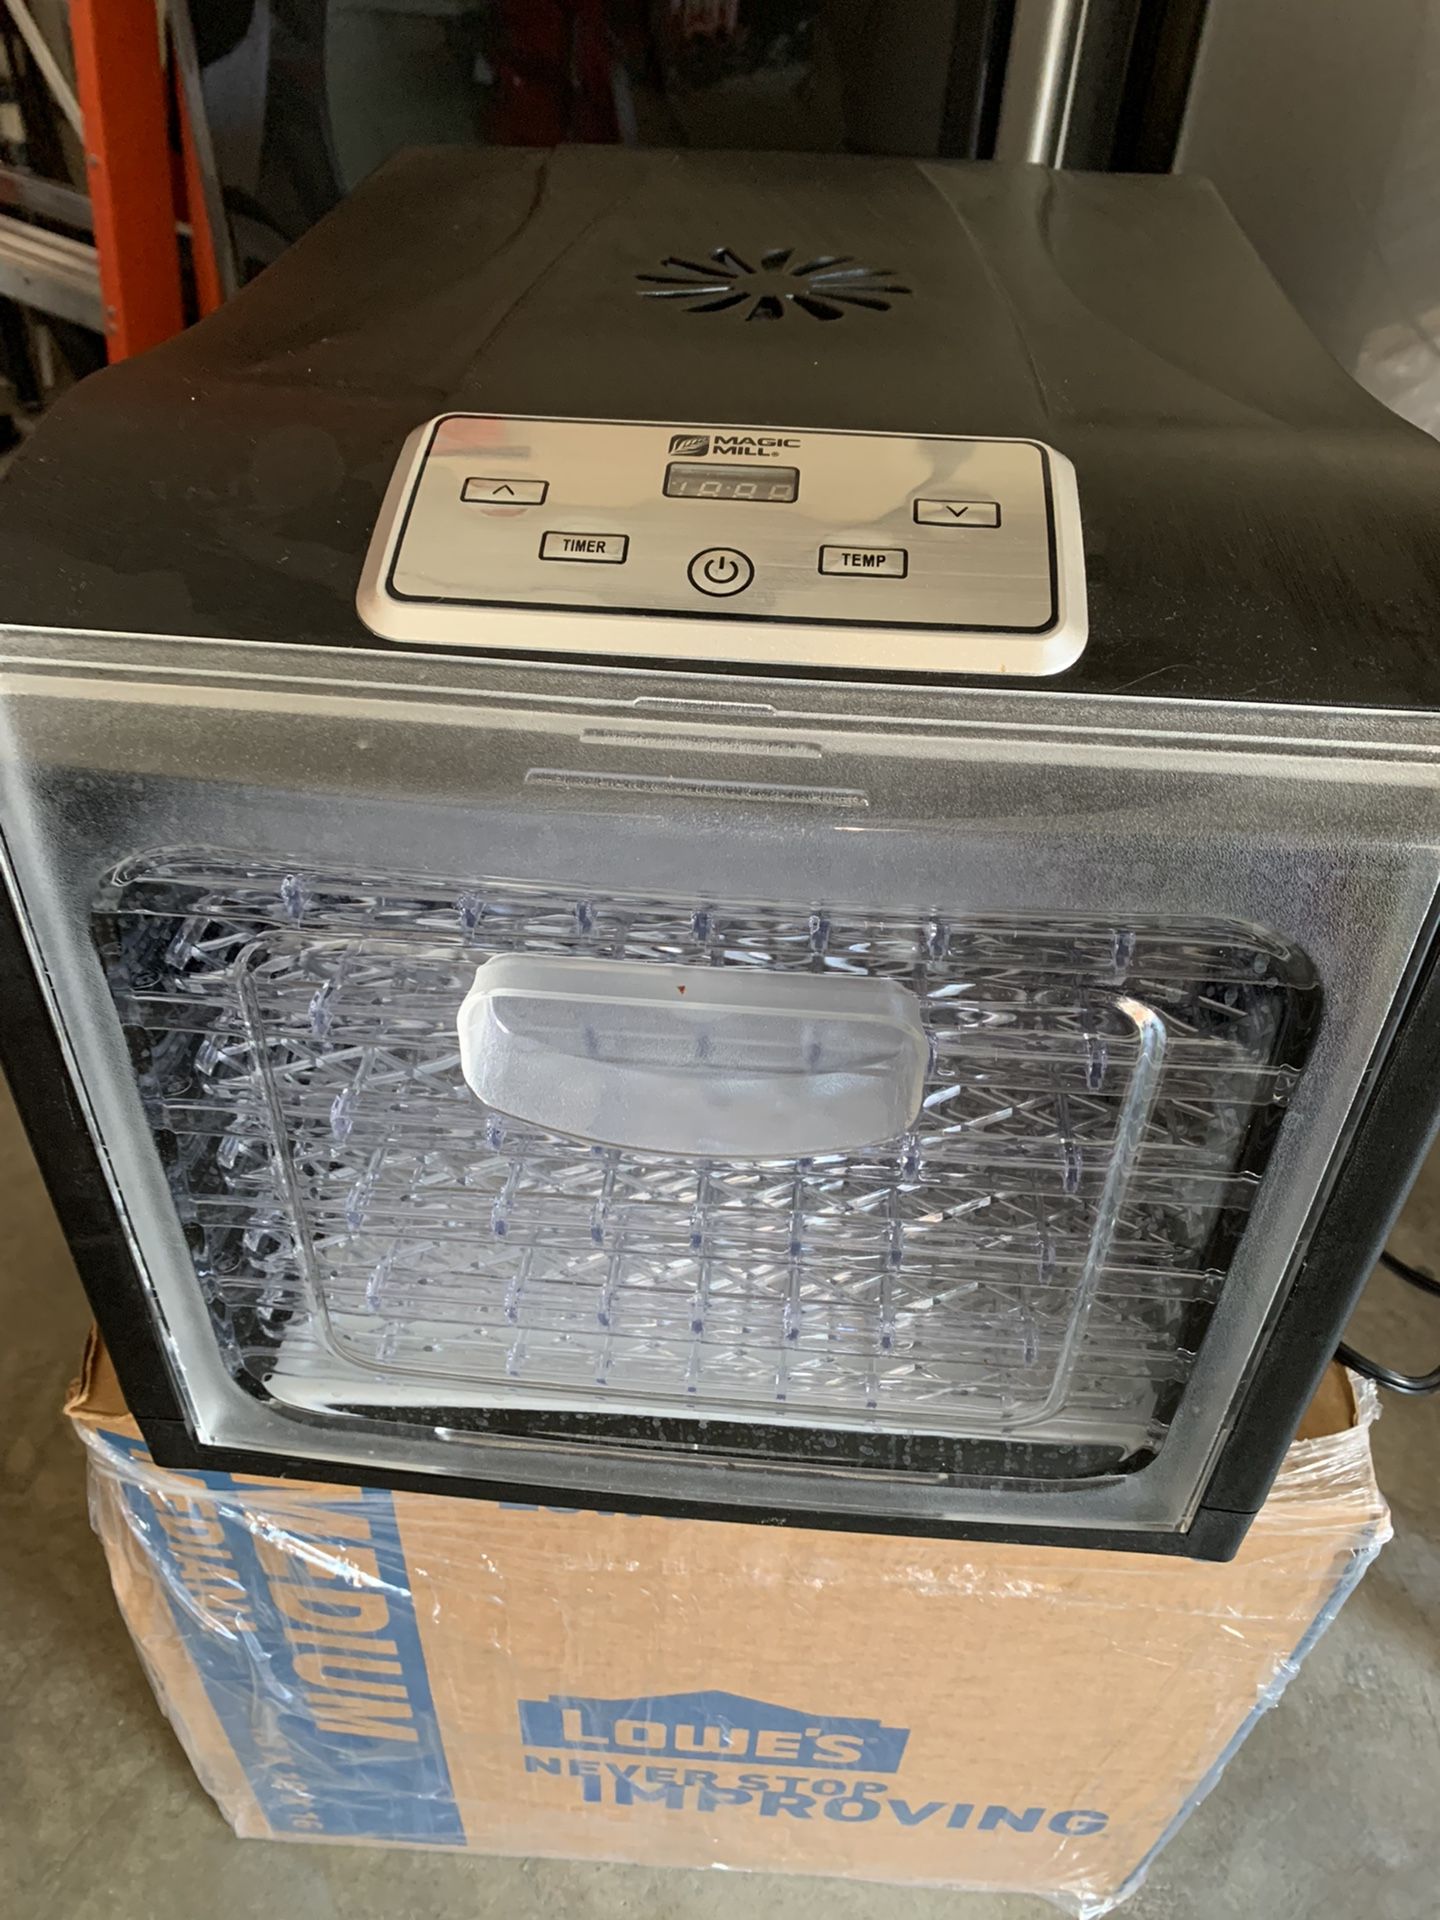 Food Dehydrator Magic Mill MFD-9100 for Sale in Phillips Ranch, CA - OfferUp